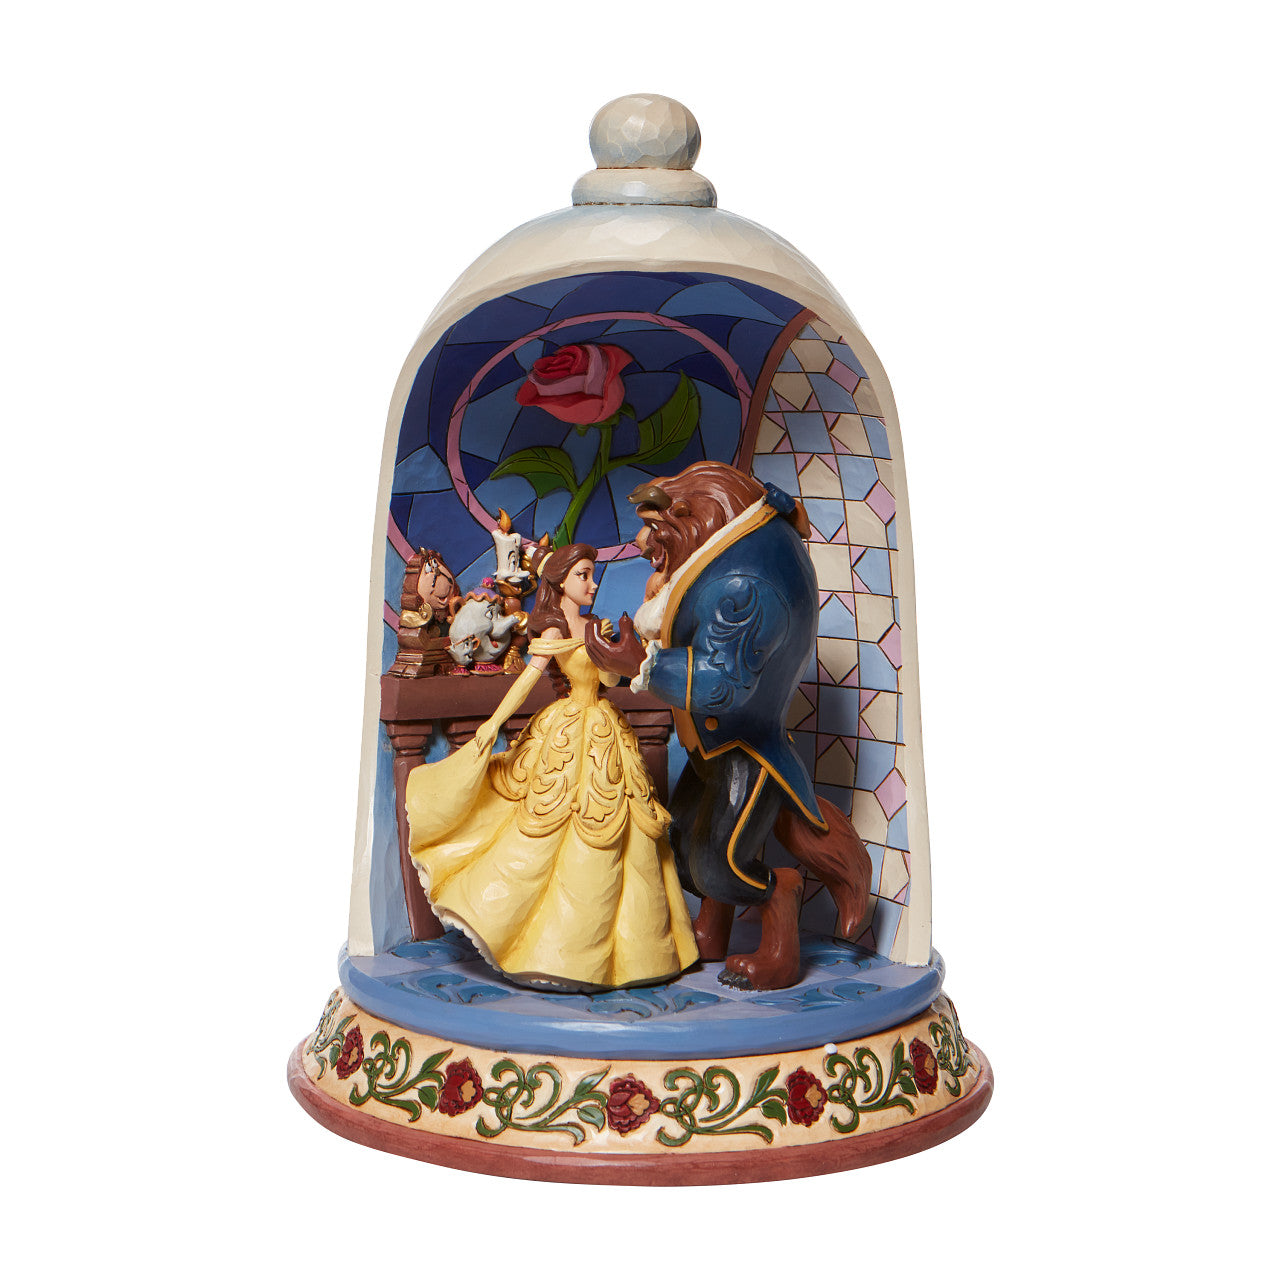 Enchanted Love - Beauty and The Beast Rose Dome